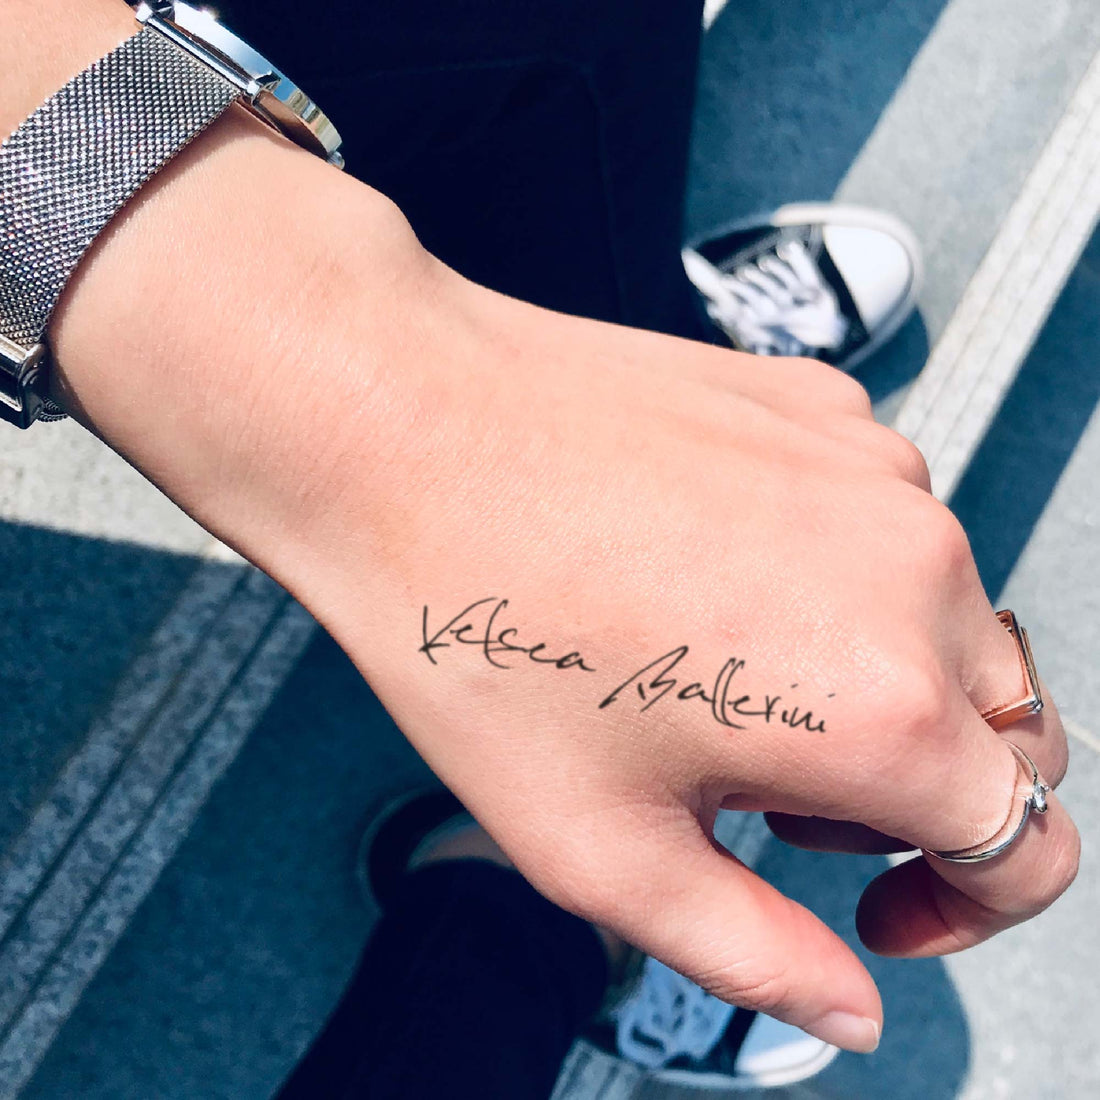 Kelsea Ballerini custom temporary tattoo sticker design idea inspiration meanings removal arm wrist hand words font name signature calligraphy lyrics tour concert outfits merch accessory gift souvenir costumes wear dress up code